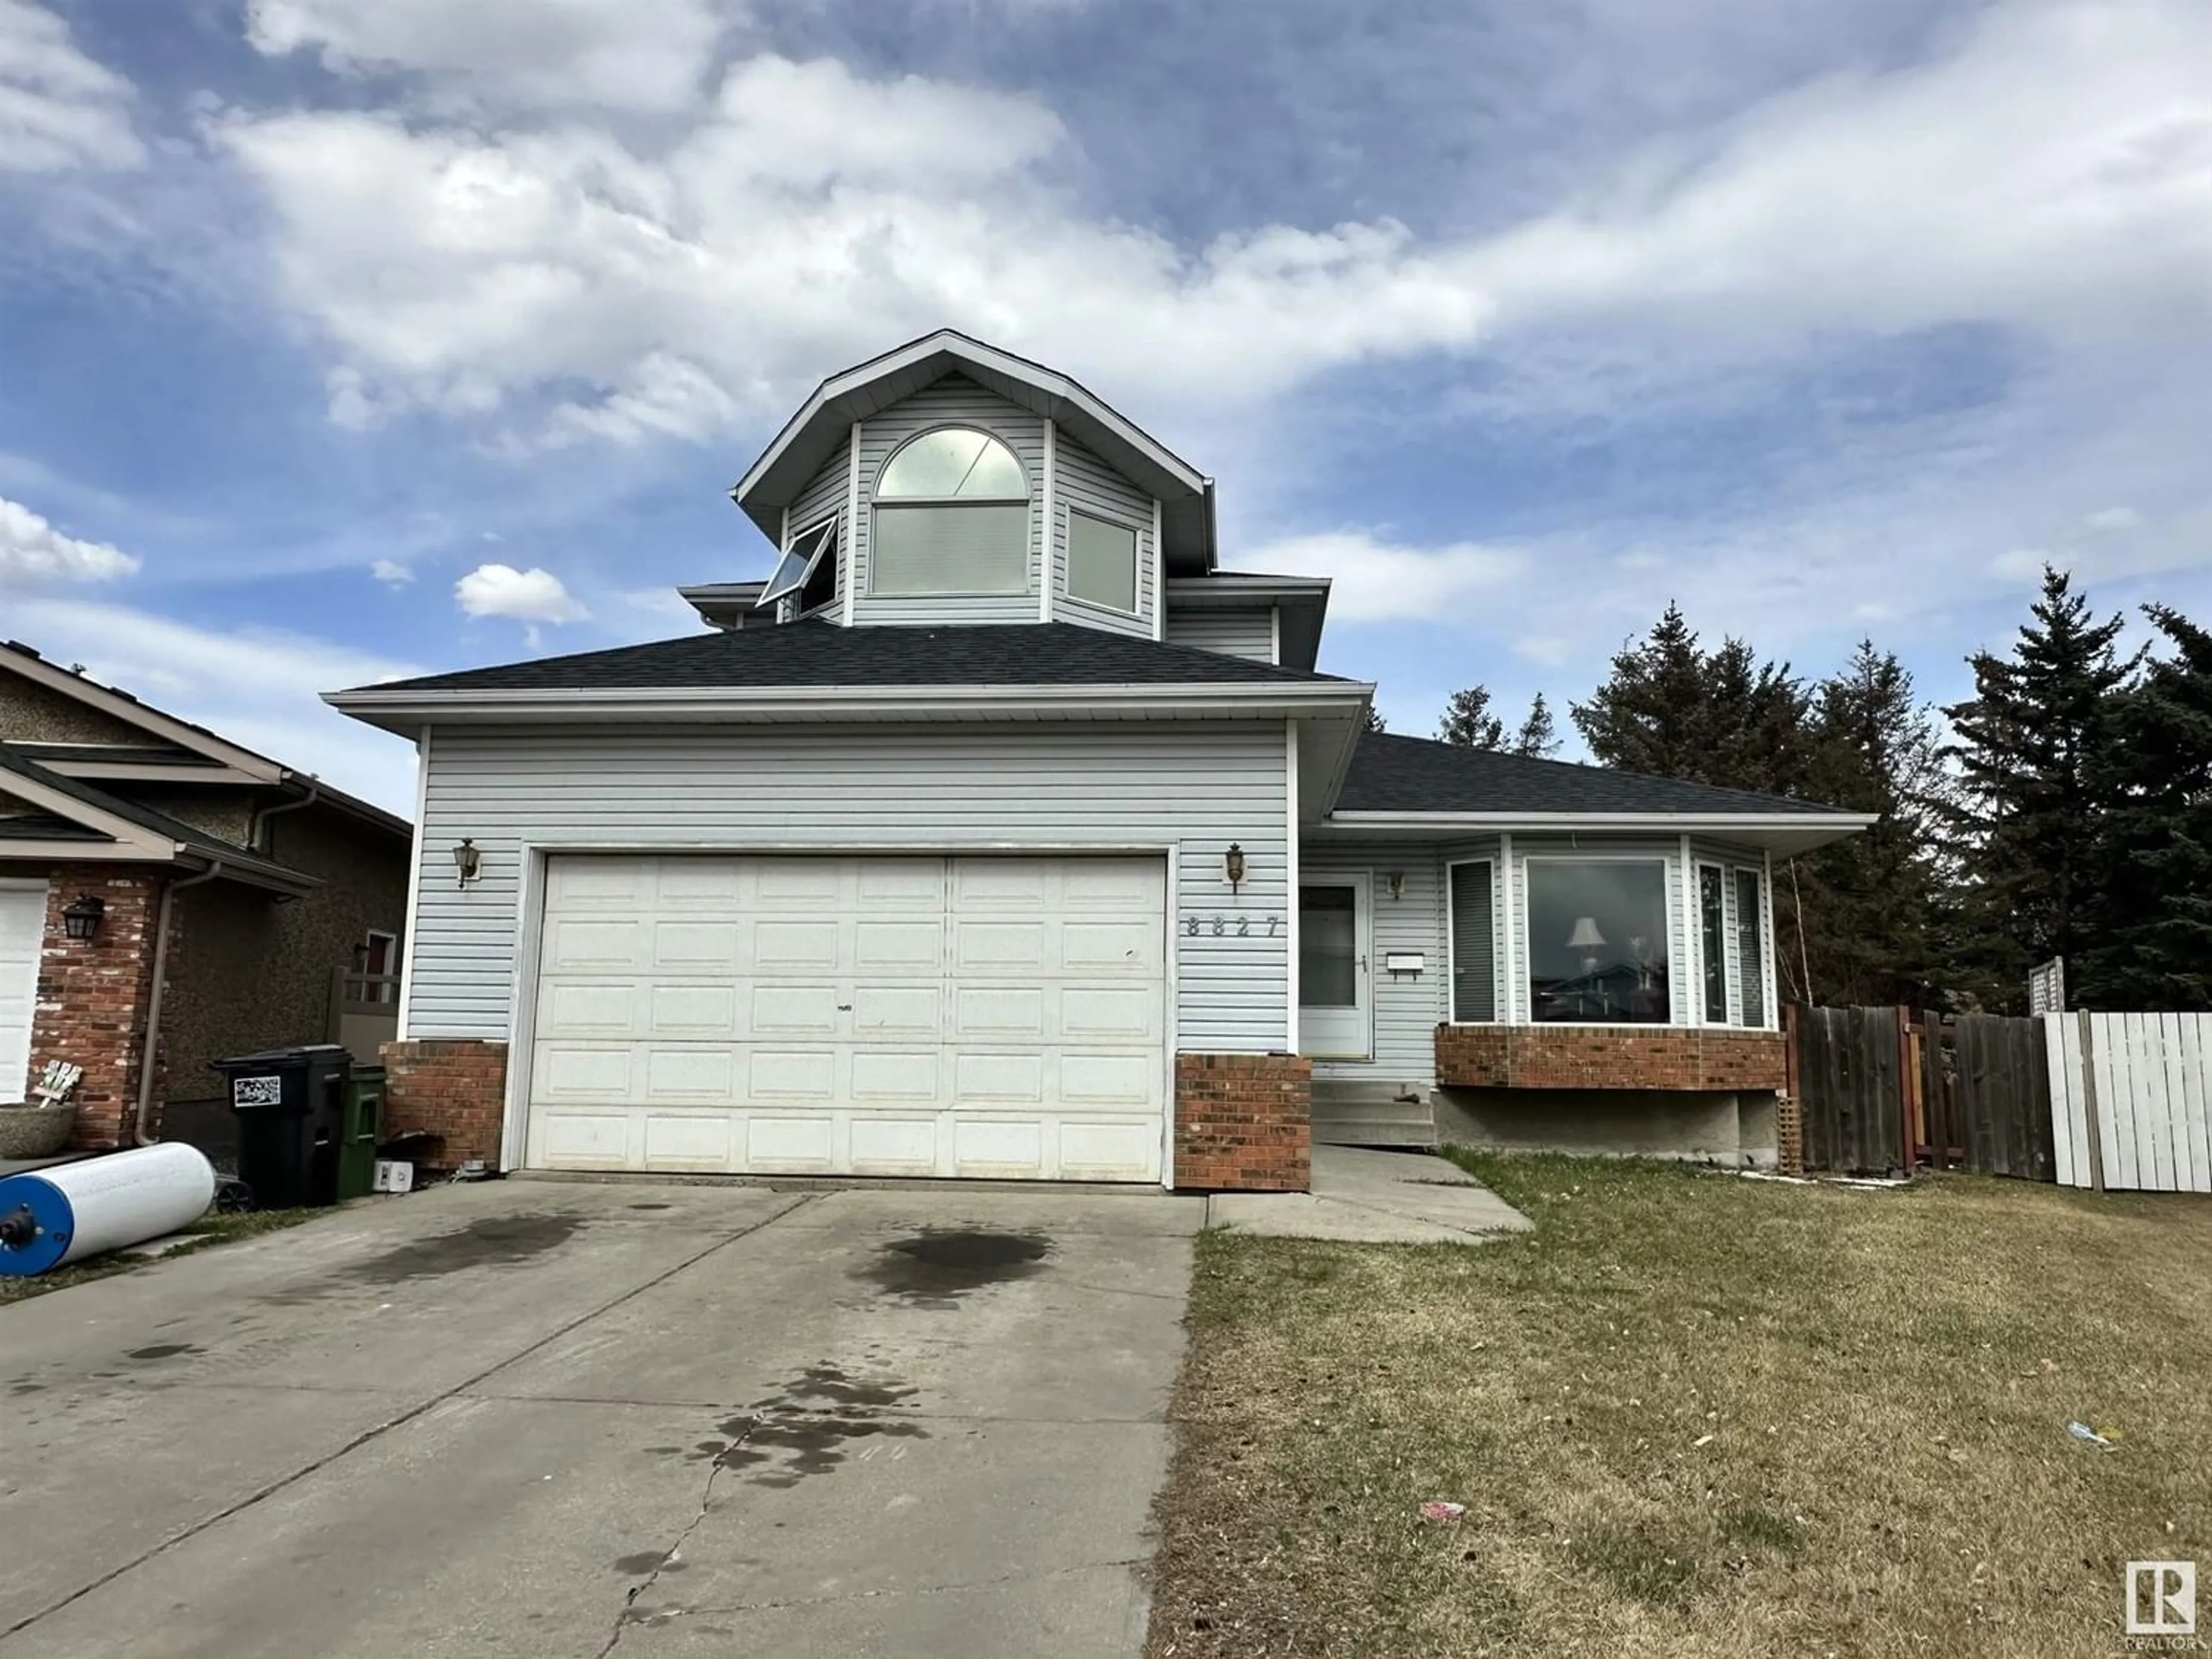 Frontside or backside of a home for 8827 188 ST NW, Edmonton Alberta T5T5Z8